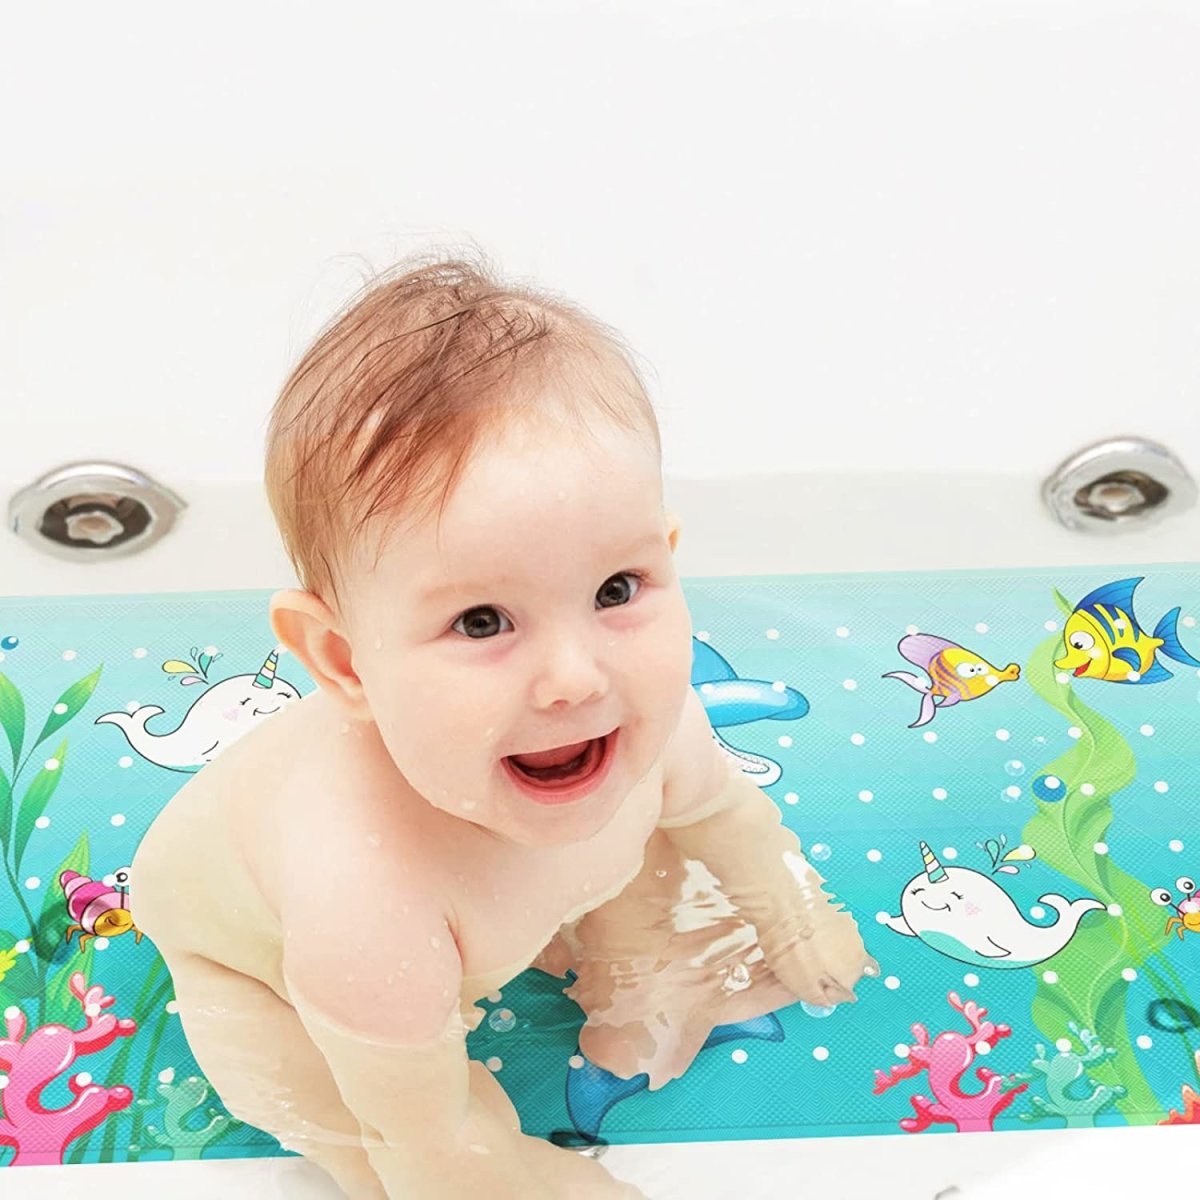 Upgrade Baby Bath Mat Non Slip Extra Long Bathtub Mat for Kids 40 X 16 Inch  - Eco Friendly Bath Tub Mat with 200 Big Suction Cups,Machine Washable